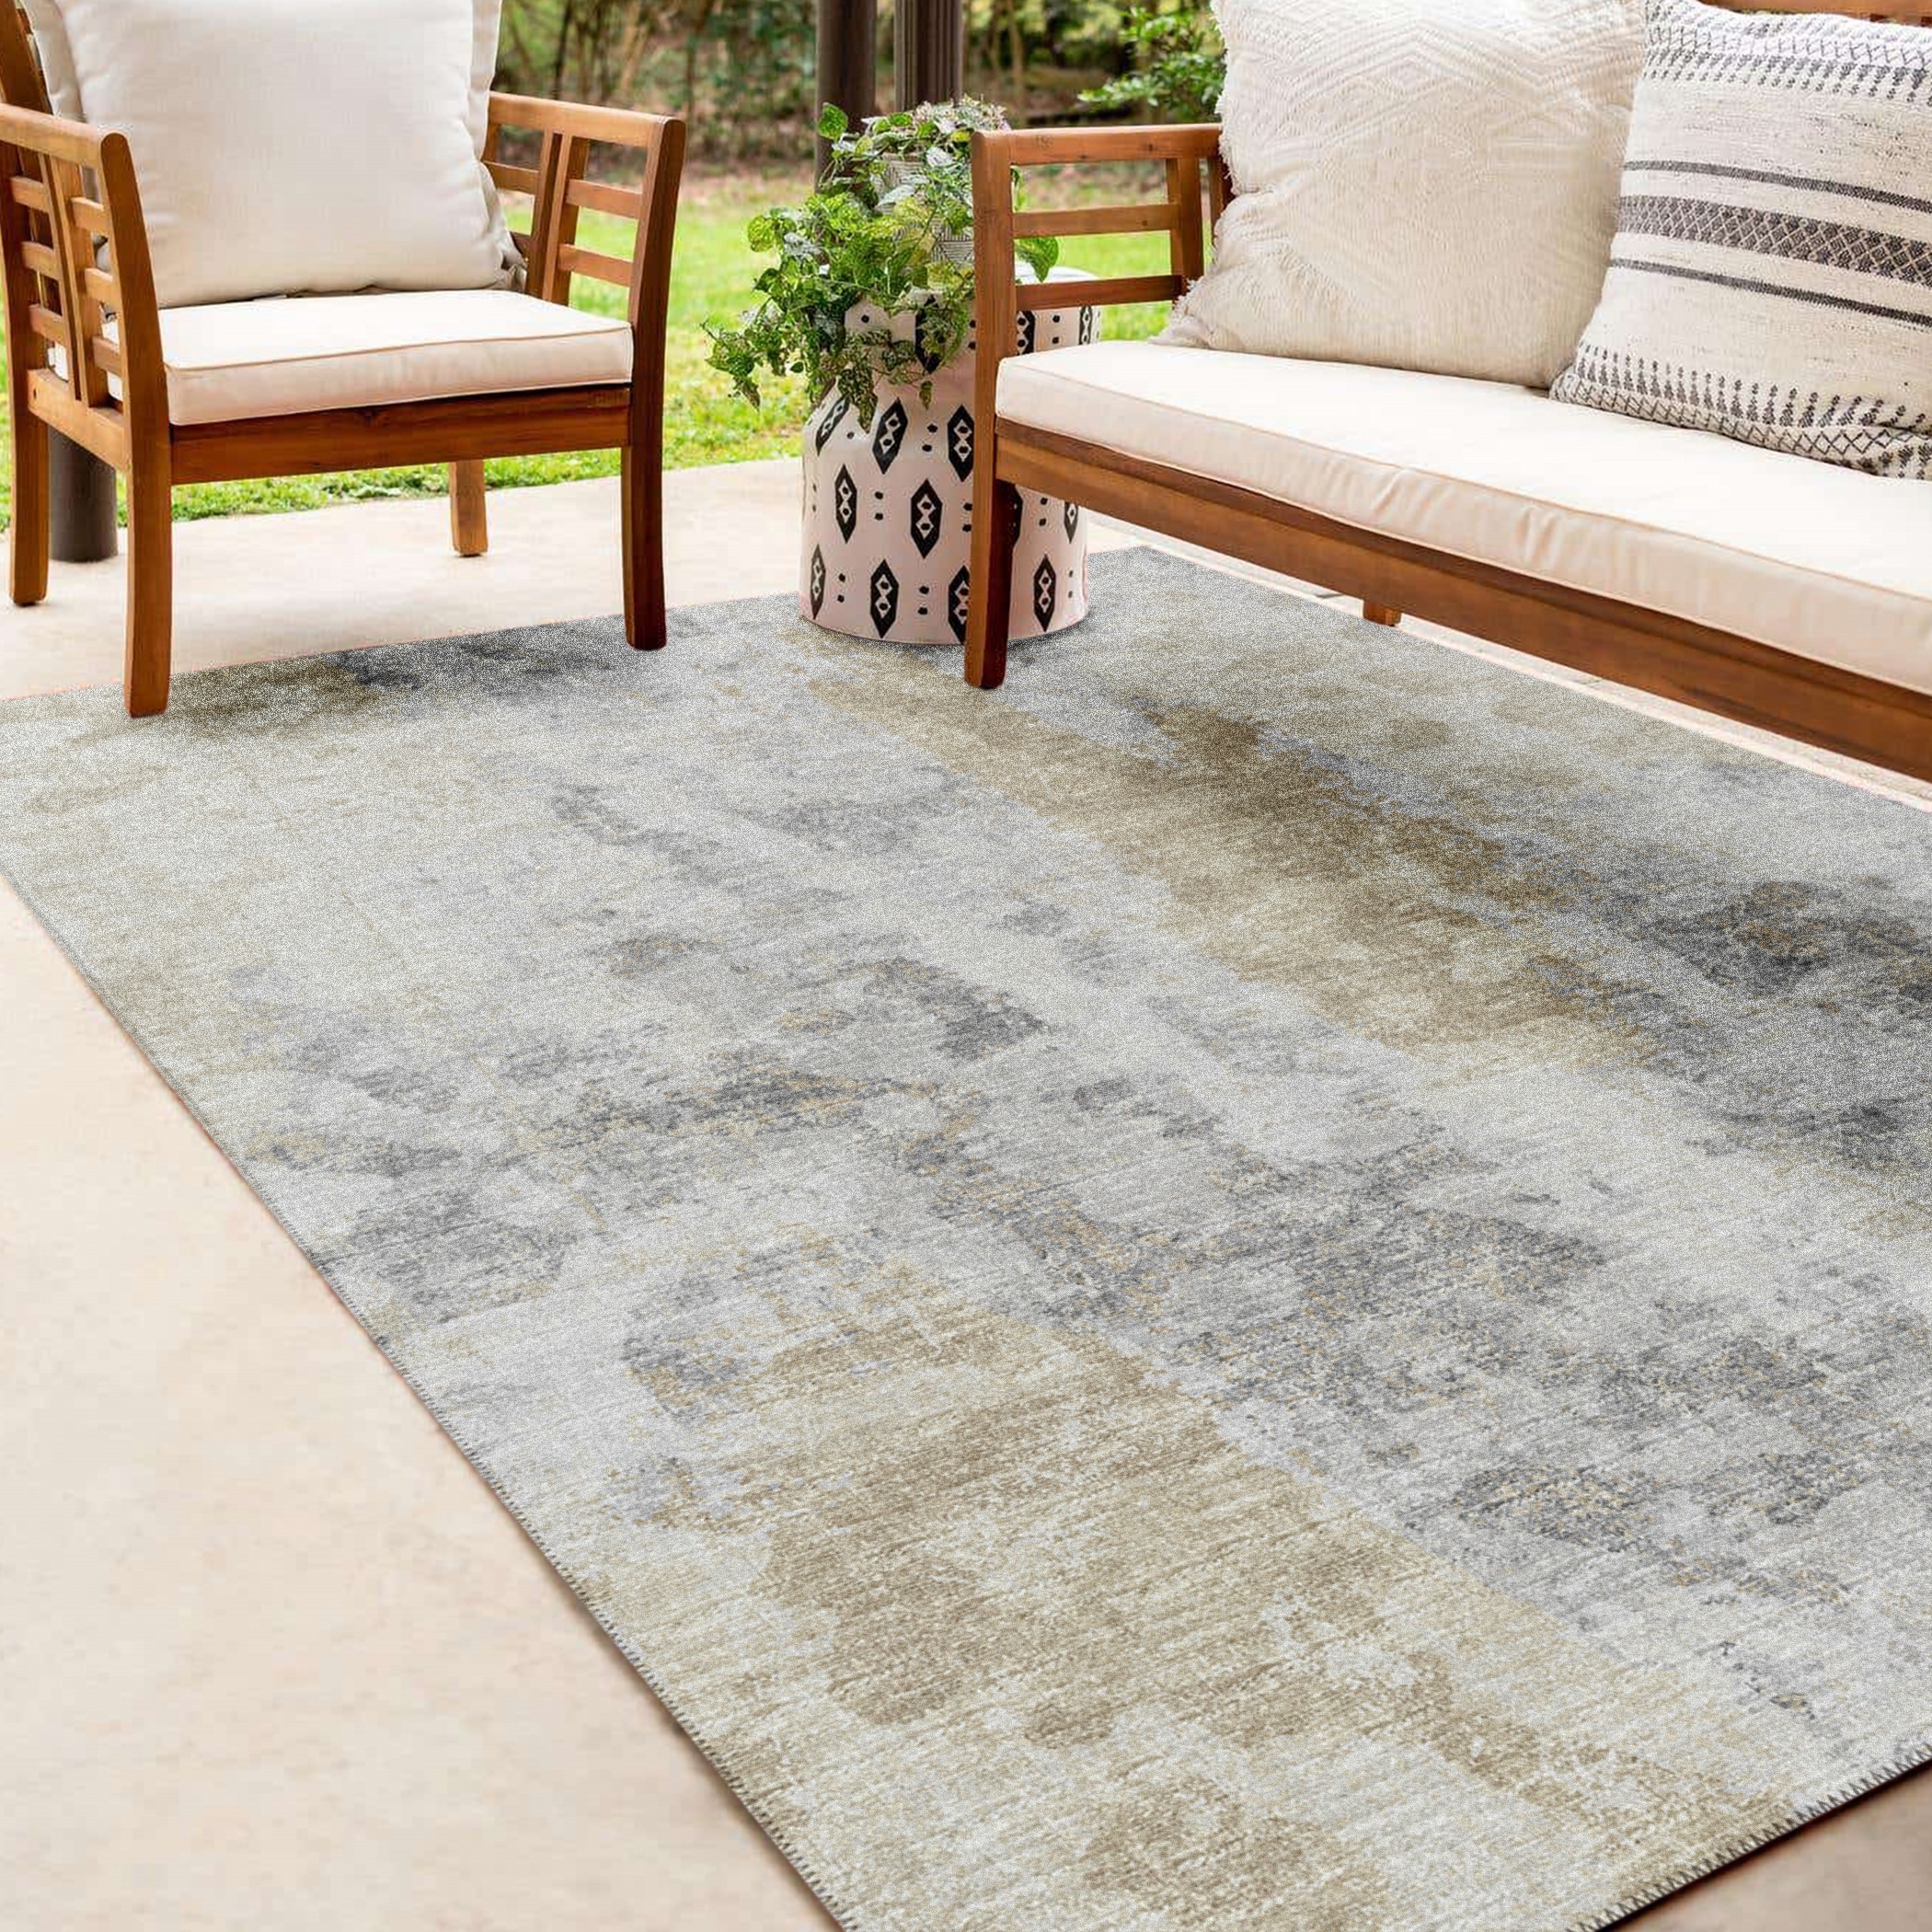 https://ak1.ostkcdn.com/images/products/is/images/direct/64786d3d199c2ebbf15b0bc4a72e278070c60274/Indoor--Outdoor-Accord-Abstract-Polyester-Washable-Rug-New.jpg